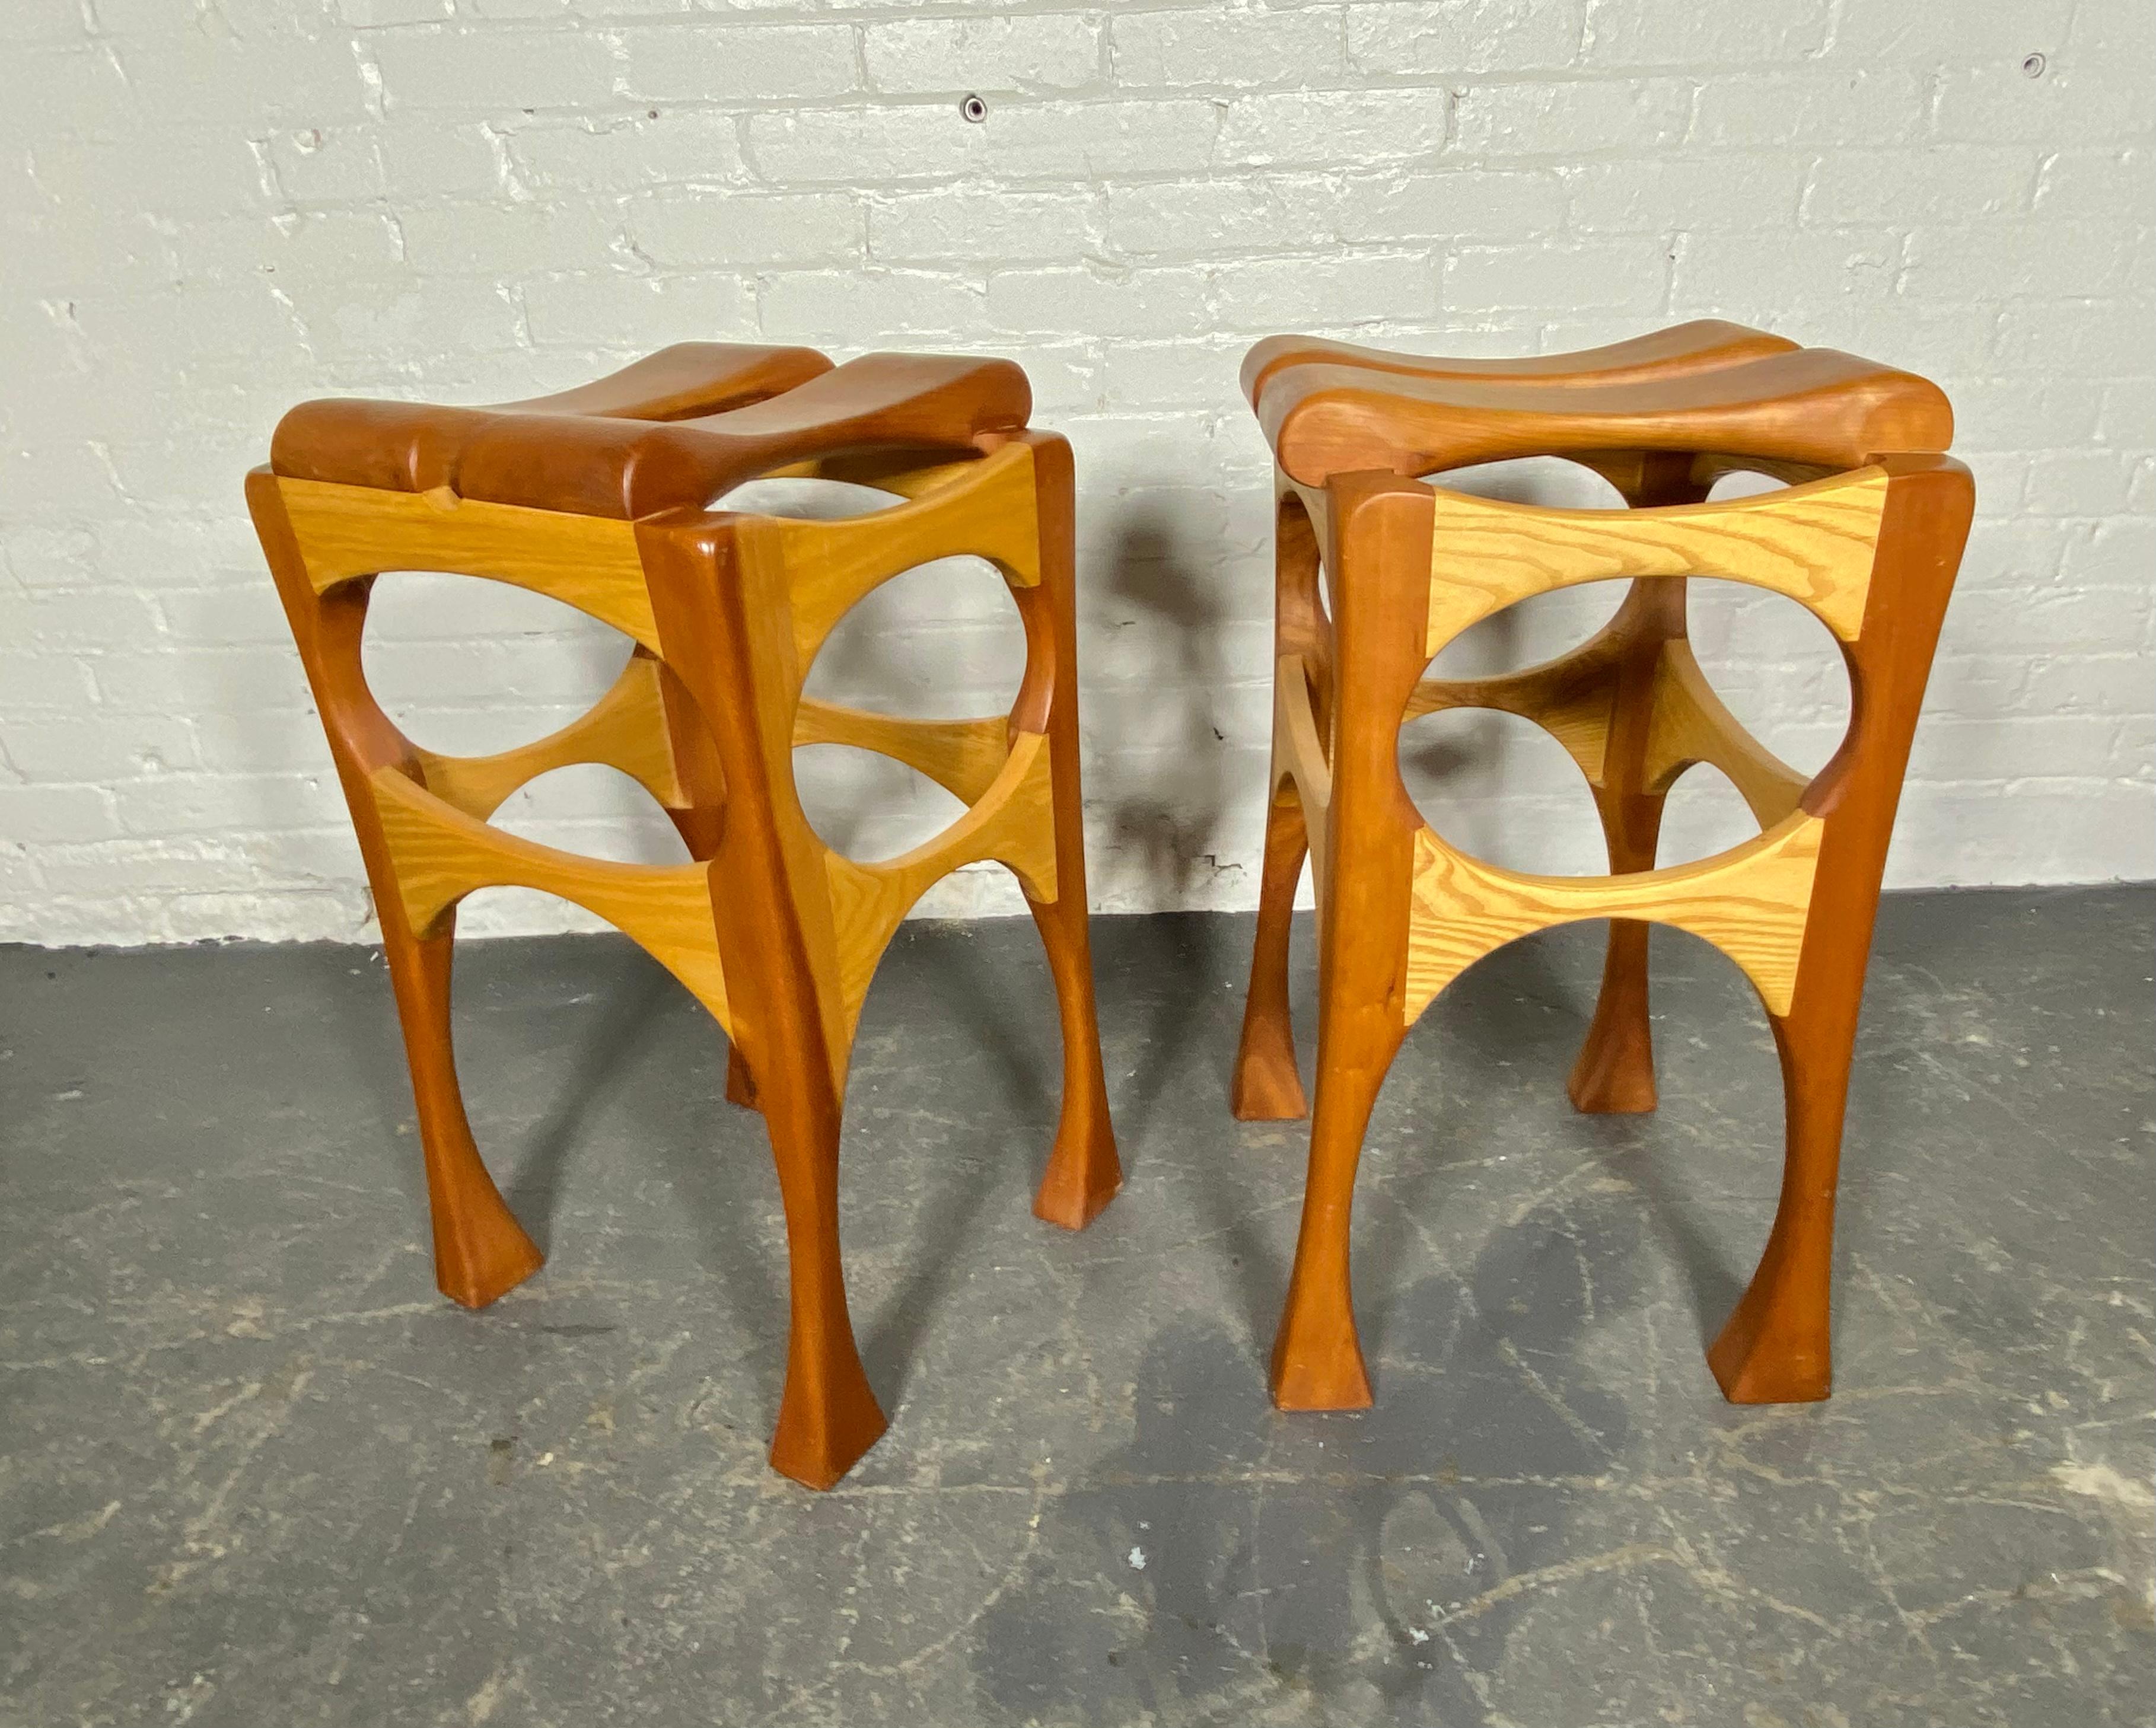 Contemporary Hand Crafted Bespoke Workshop/Studio Stools.  2-tone birch and cherry  For Sale